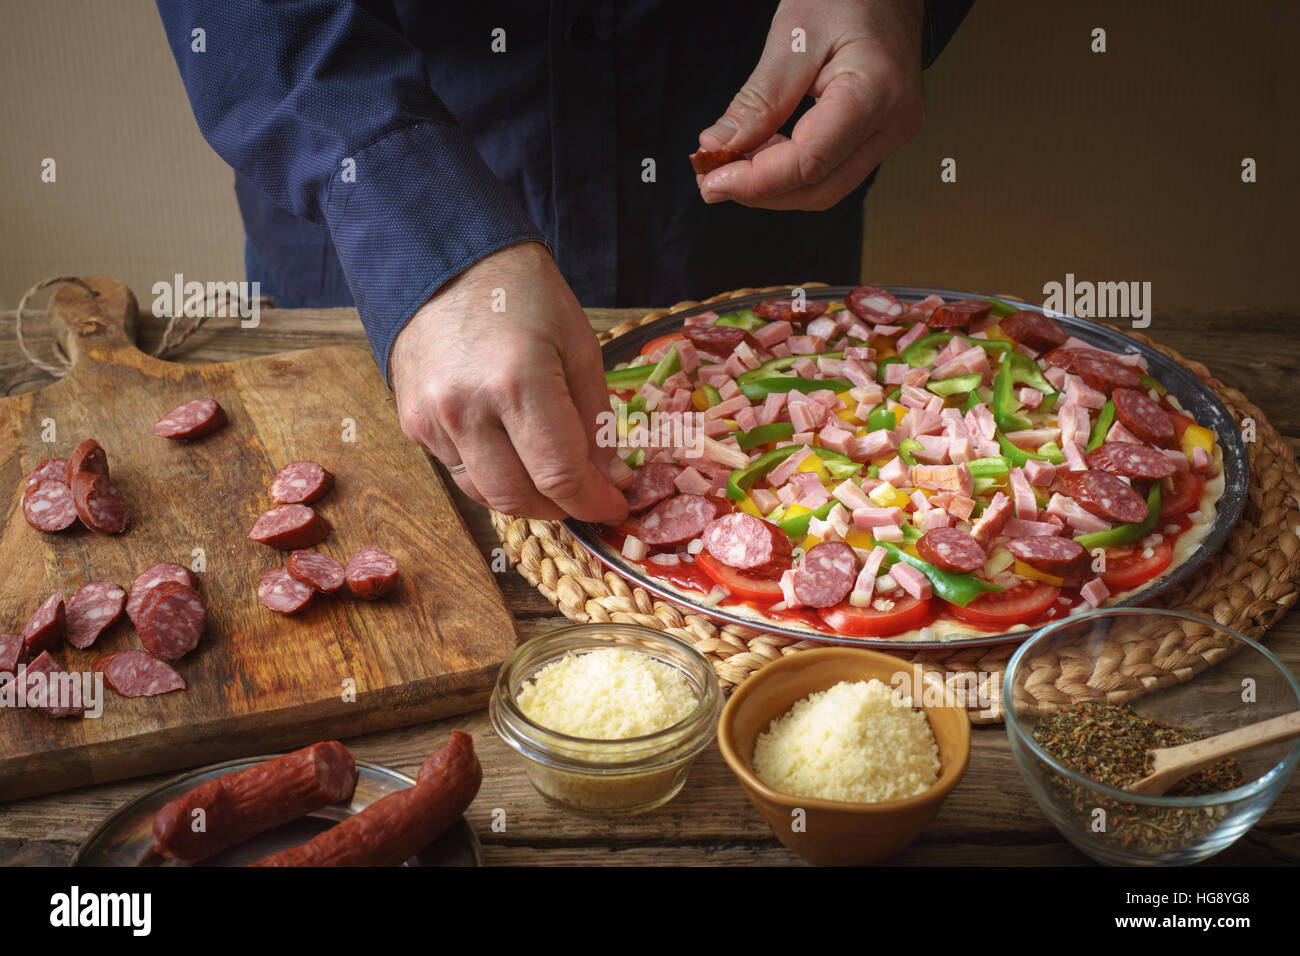 Man in a blue shirt makes homemade pizza on the table horizontal Stock Photo